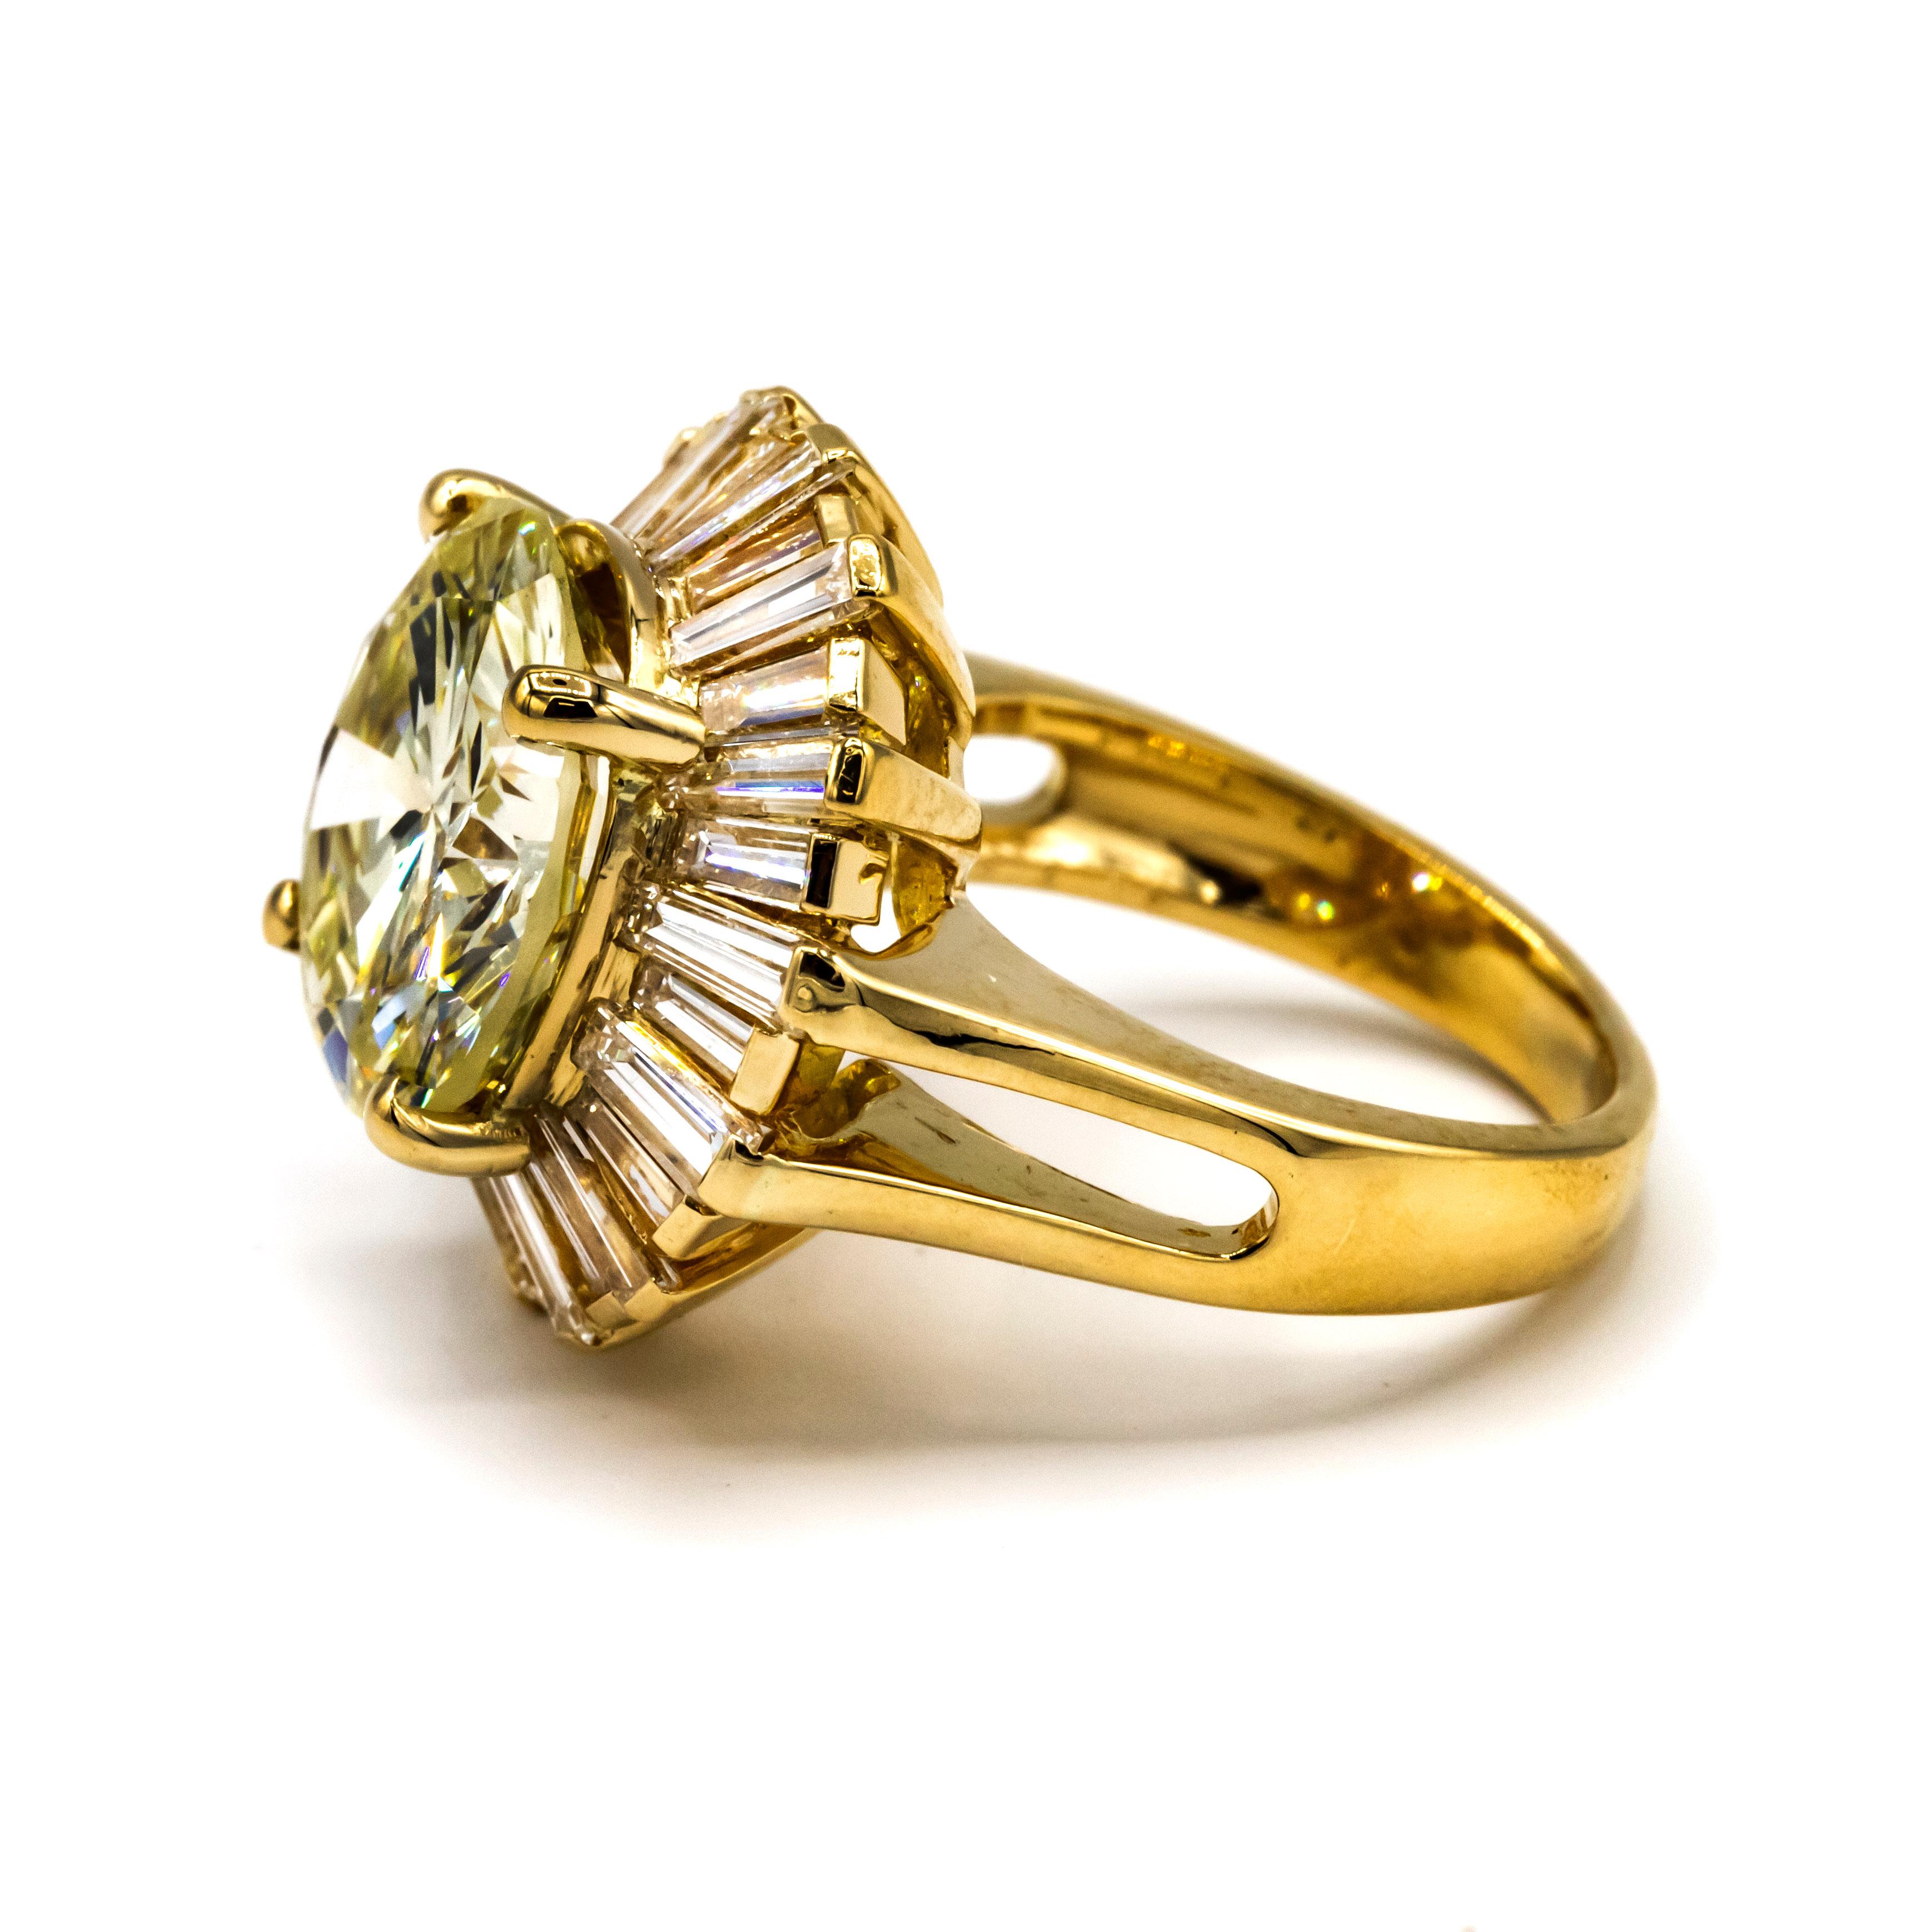 When shopping for vintage engagement rings there are just so many choices but after all, it is the style of the ring that matters the most. Can you picture yourself wearing yellow gold? Can you carry a large diamond? Are you open to off-white hues